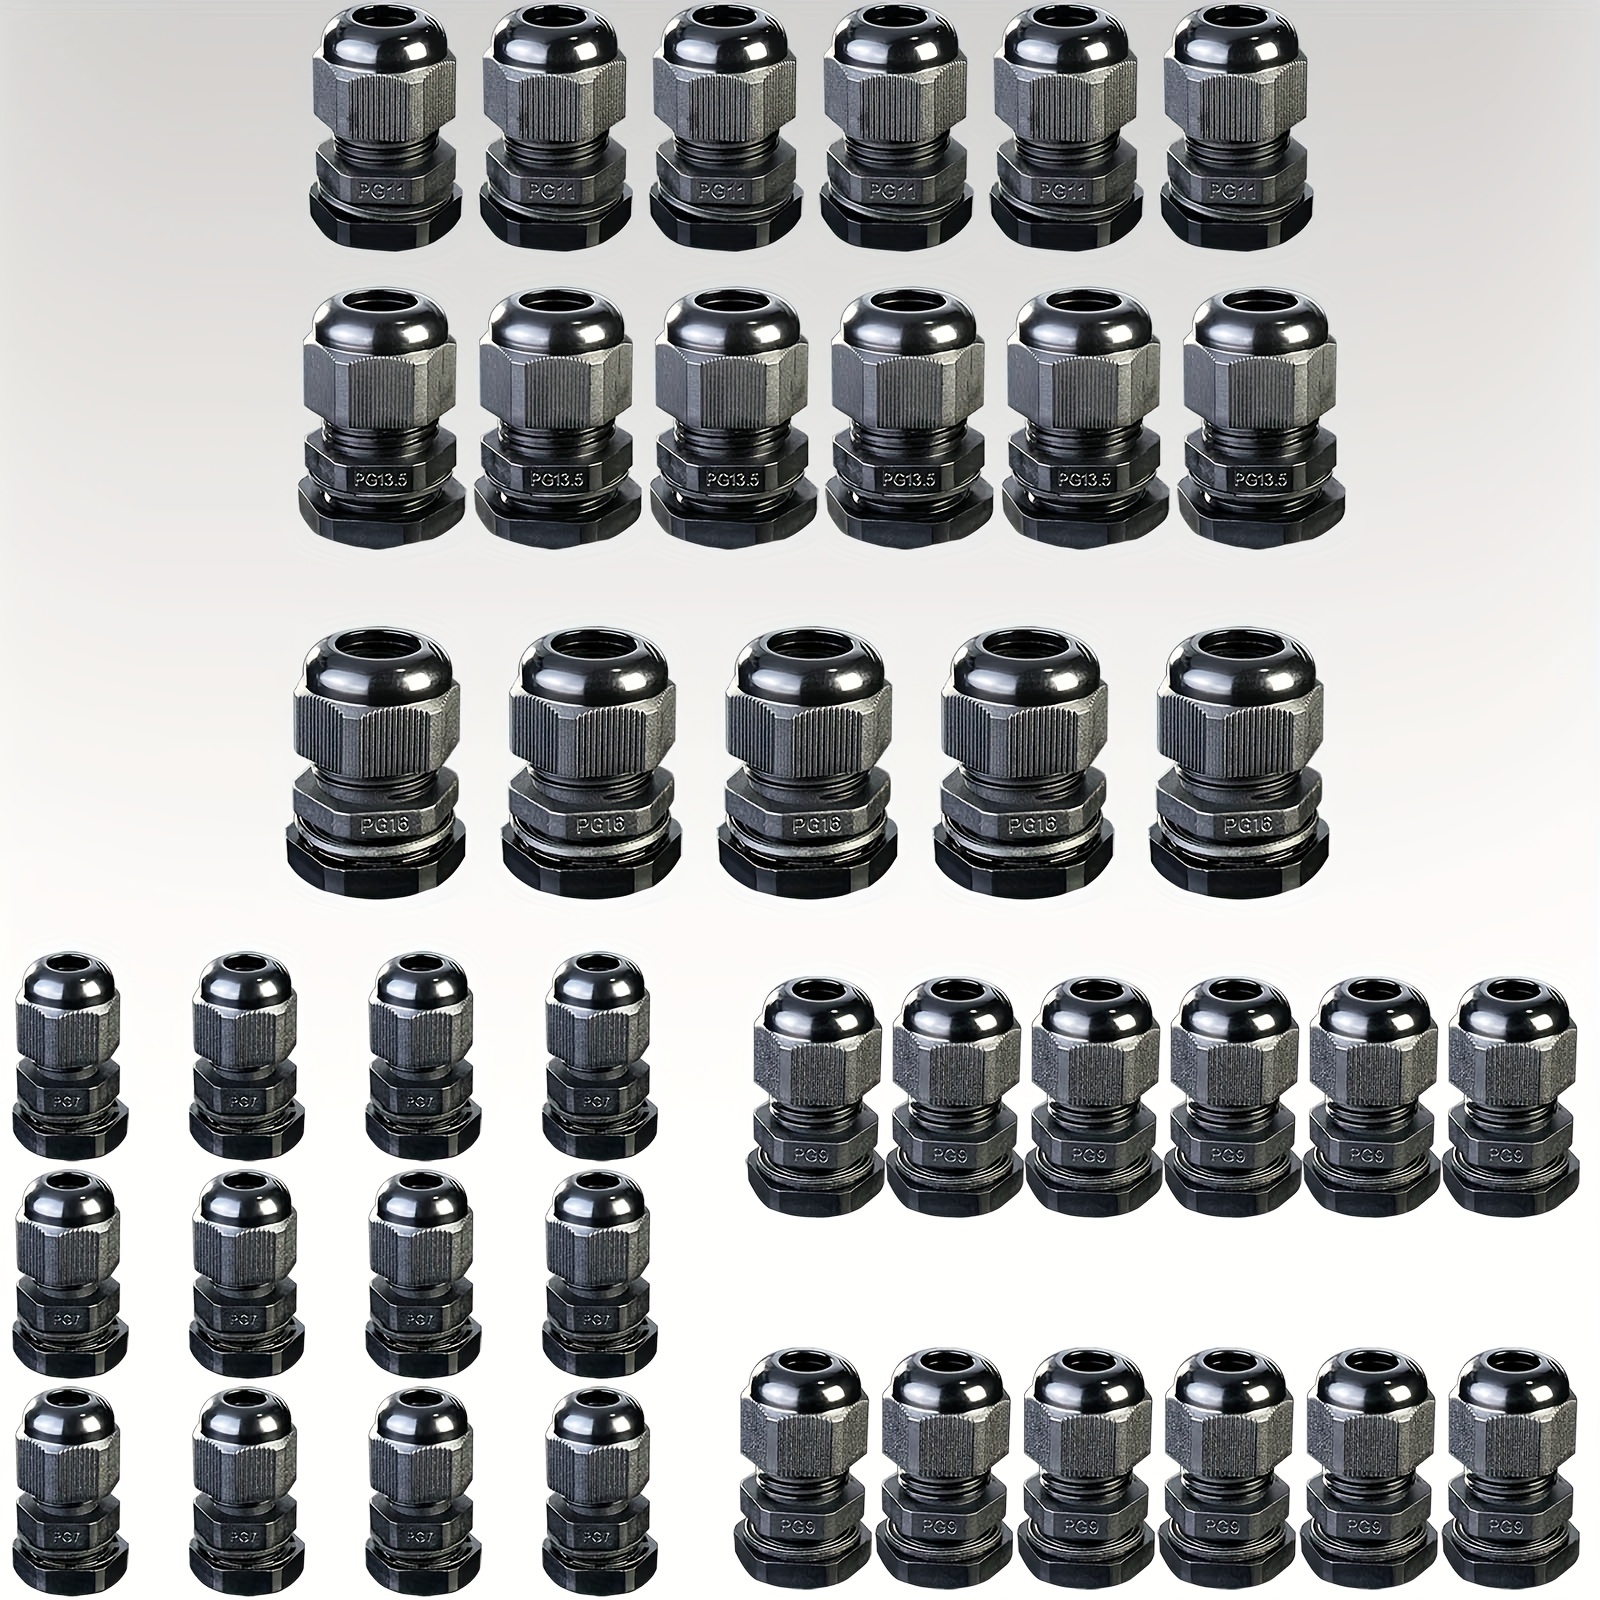 42pcs Cable Gland Assortment Kit For Electrical Box Adjustable 3-14mm Nylon  NPT Wire Gland With Gaskets (PG7, PG9, PG11, PG13.5, PG16)